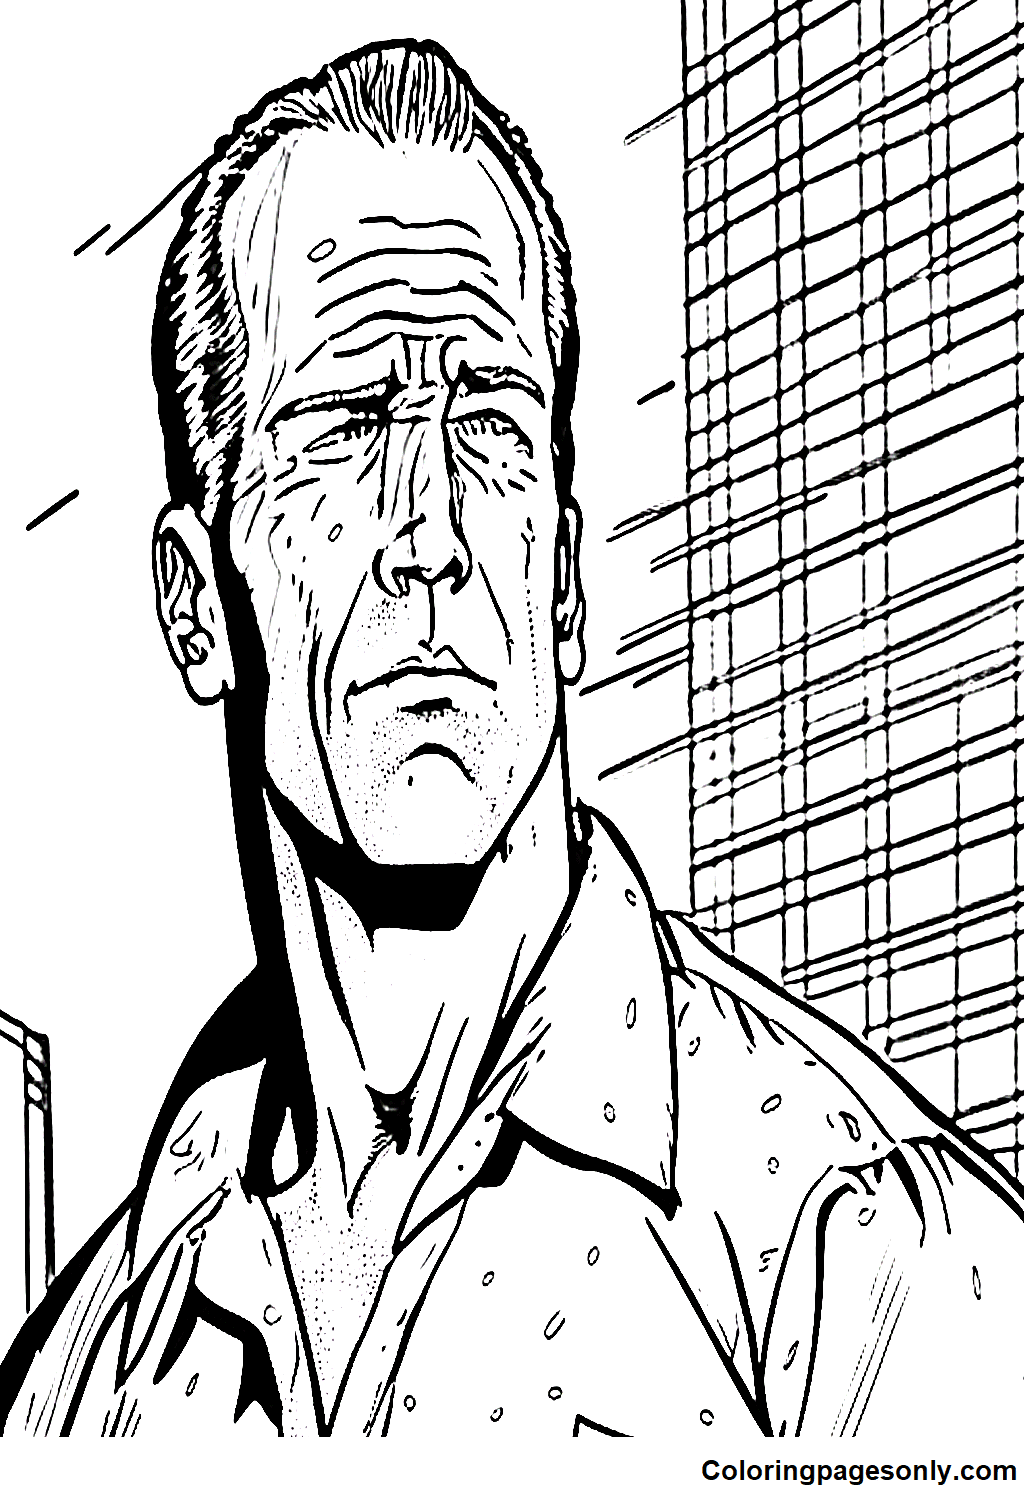 Bruce Willis as John McClane Picture Coloring Pages